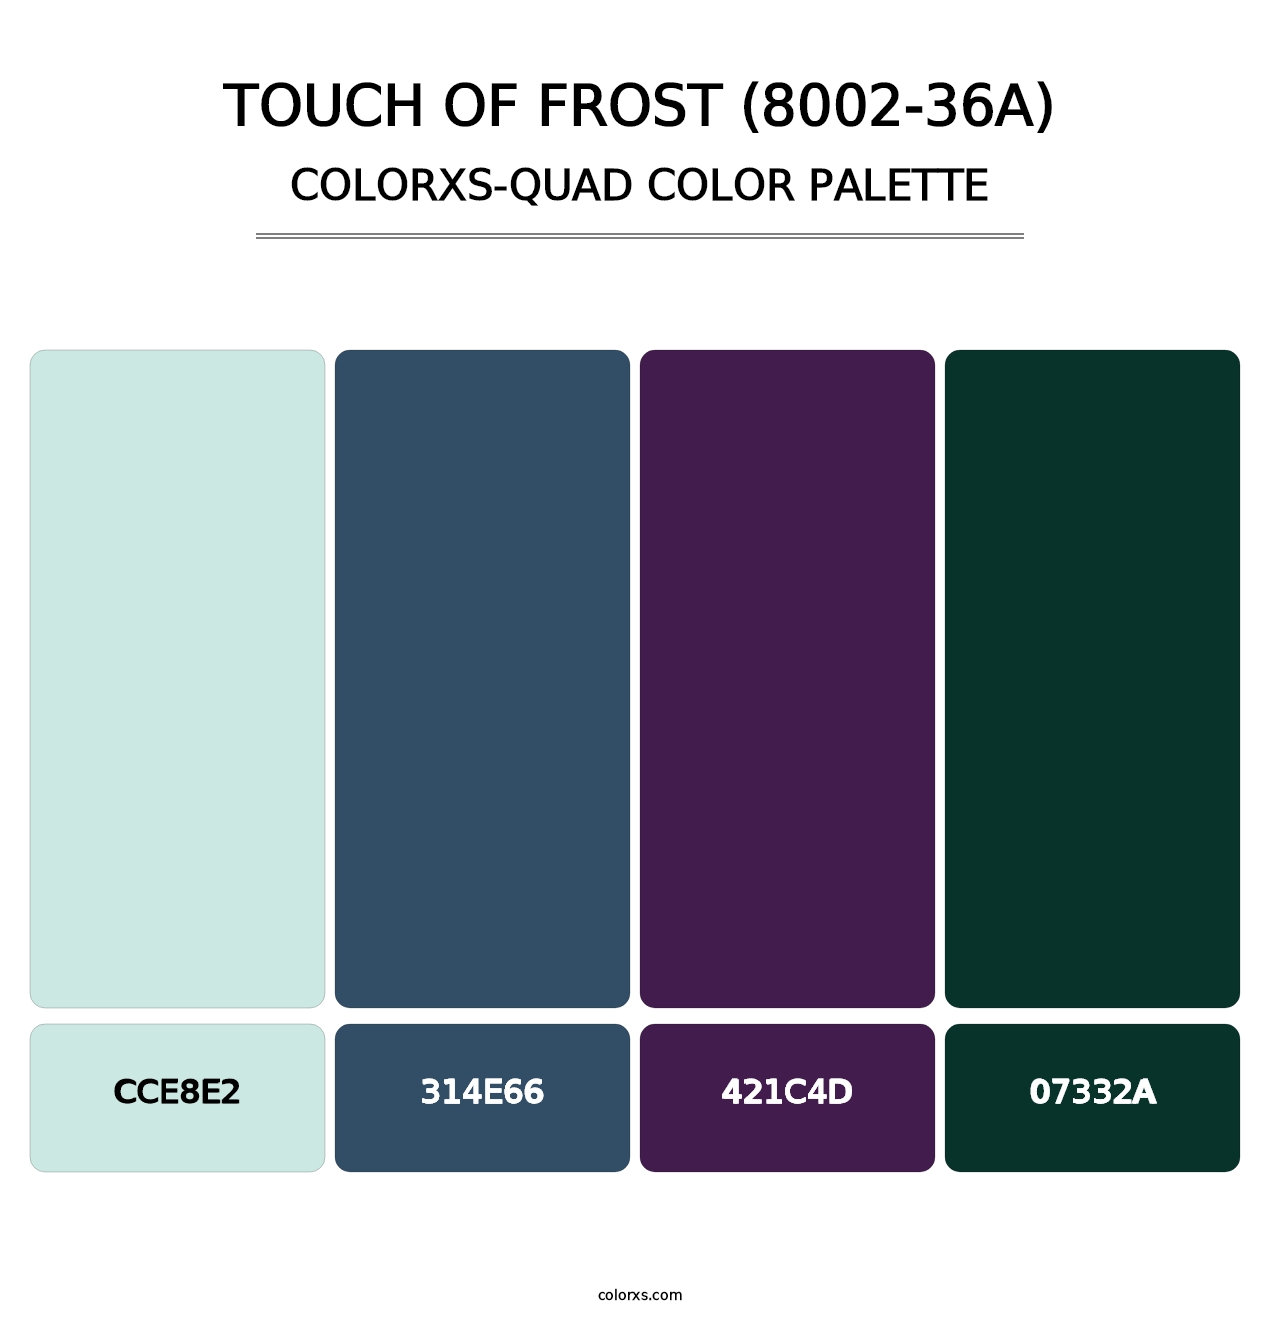 Touch of Frost (8002-36A) - Colorxs Quad Palette